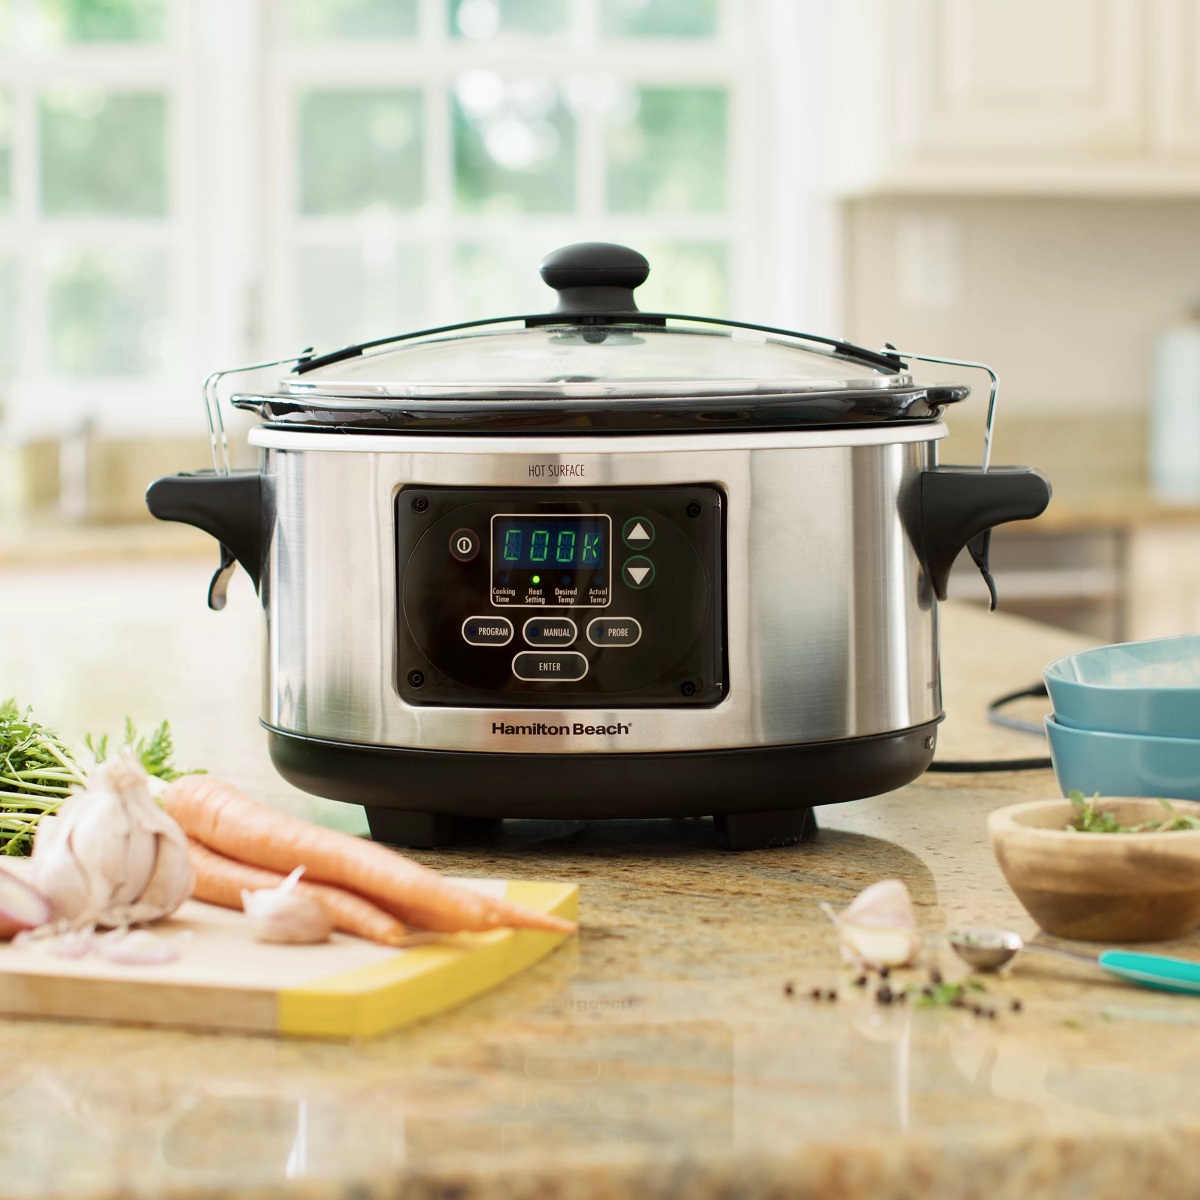 https://storables.com/wp-content/uploads/2023/08/when-was-the-slow-cooker-invented-1692179313.jpg